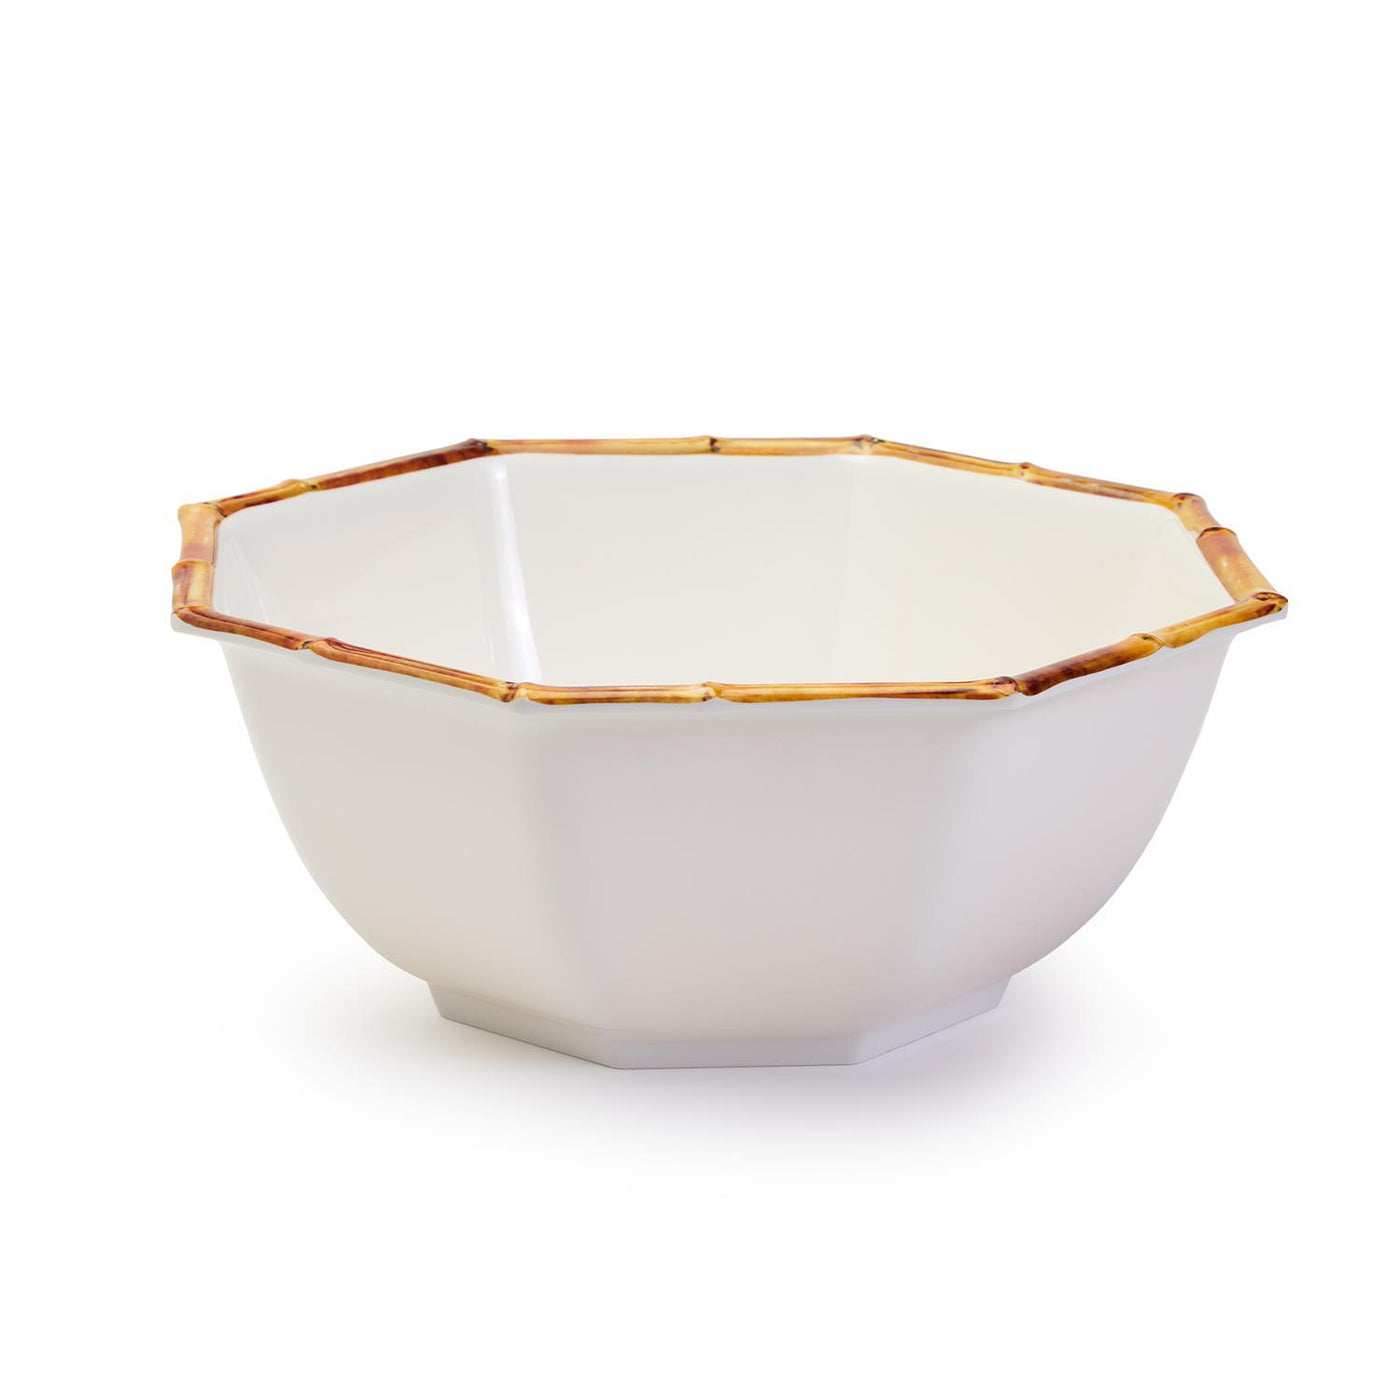 Bamboo Touch Octagonal Serving Bowl-Home/Giftware-Kevin's Fine Outdoor Gear & Apparel